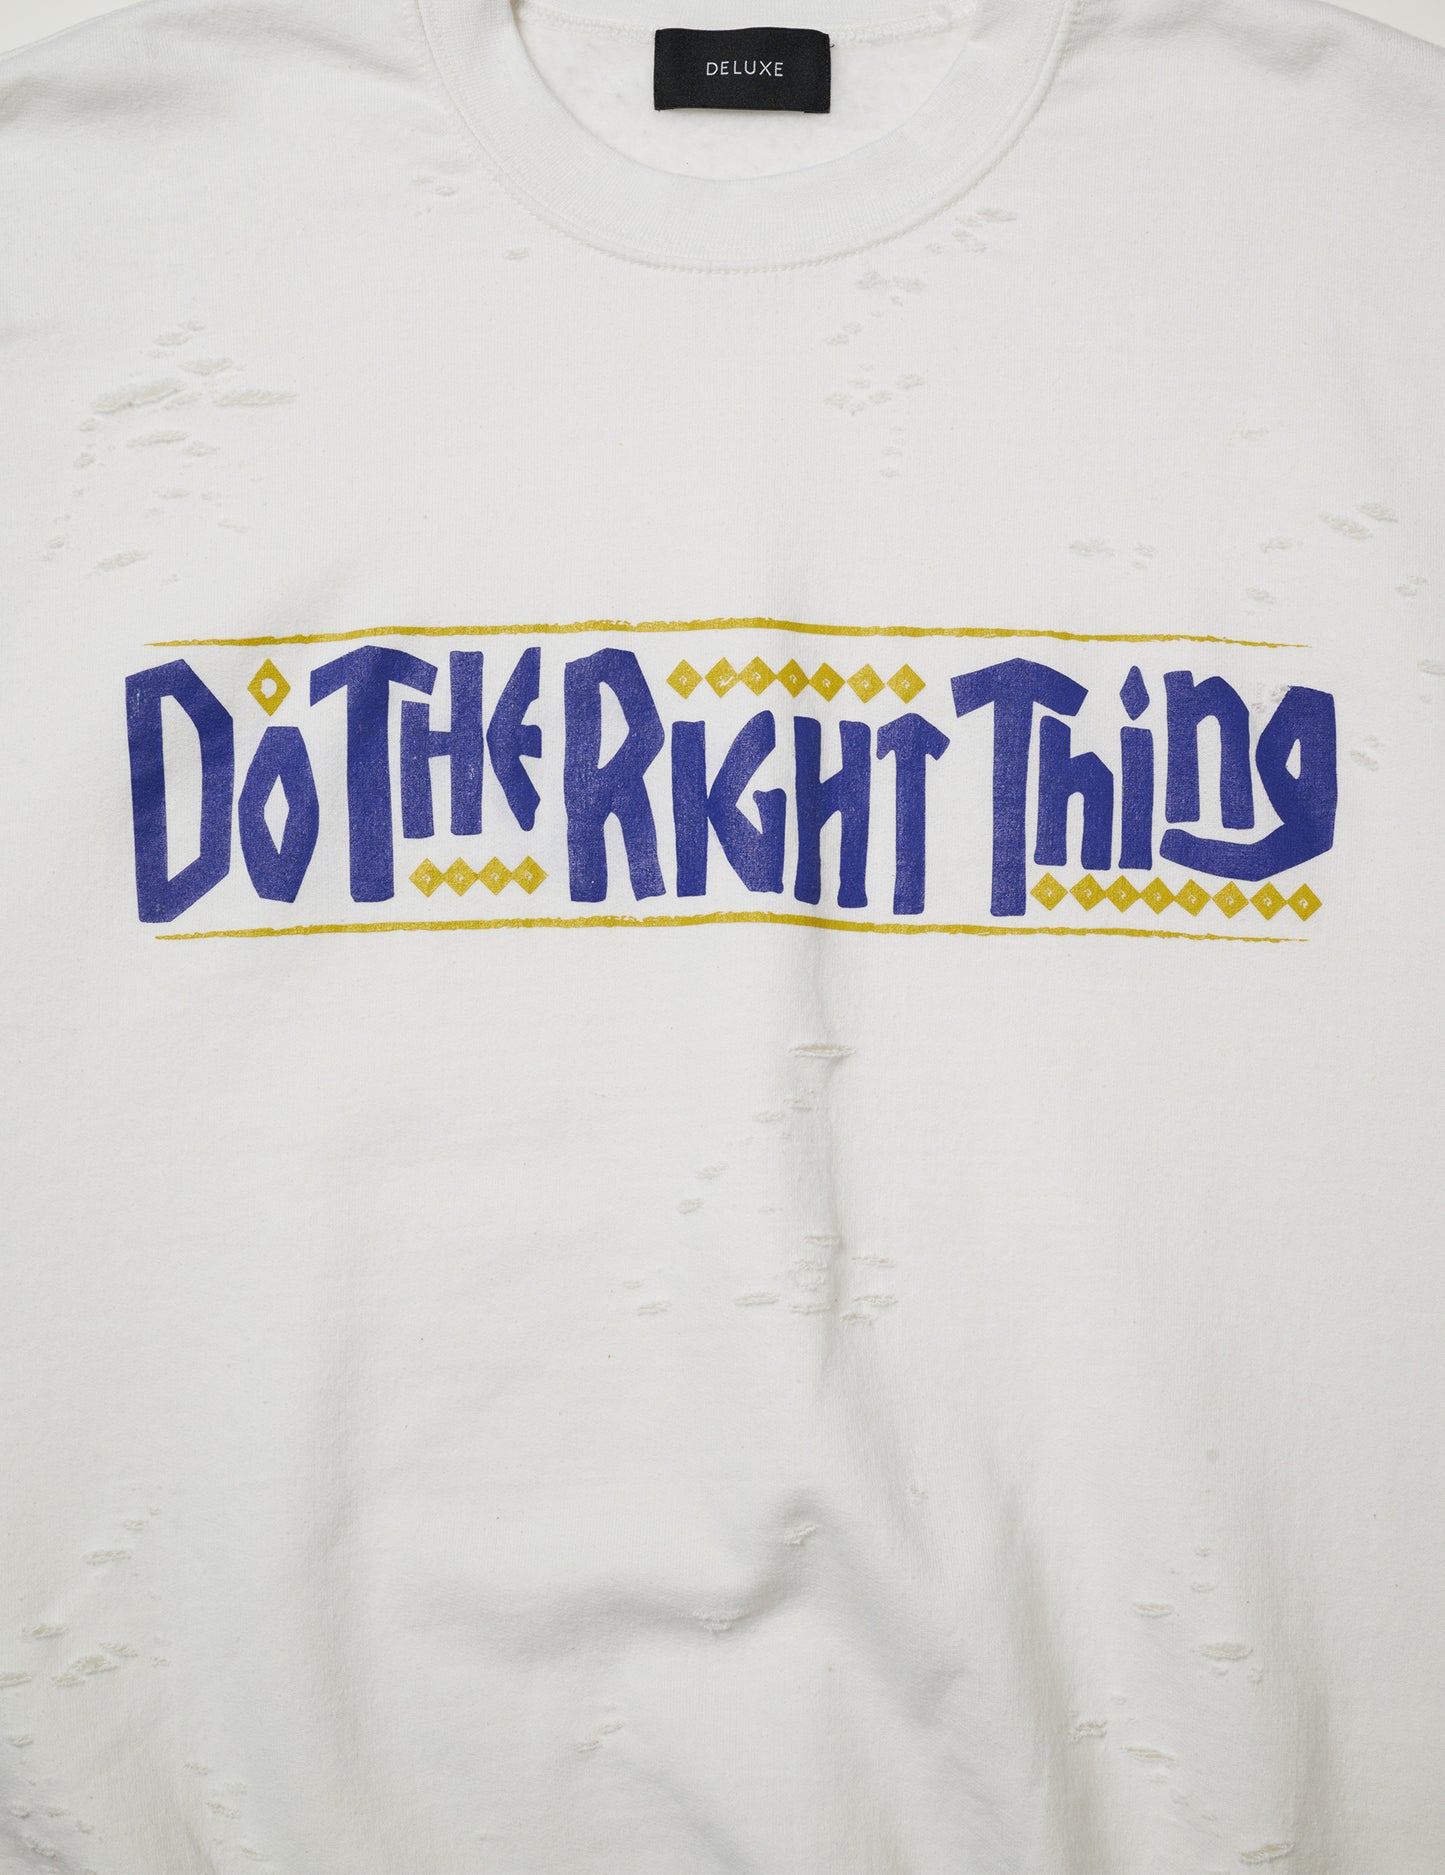 Do the right thing x DELUXE CREW WHITE